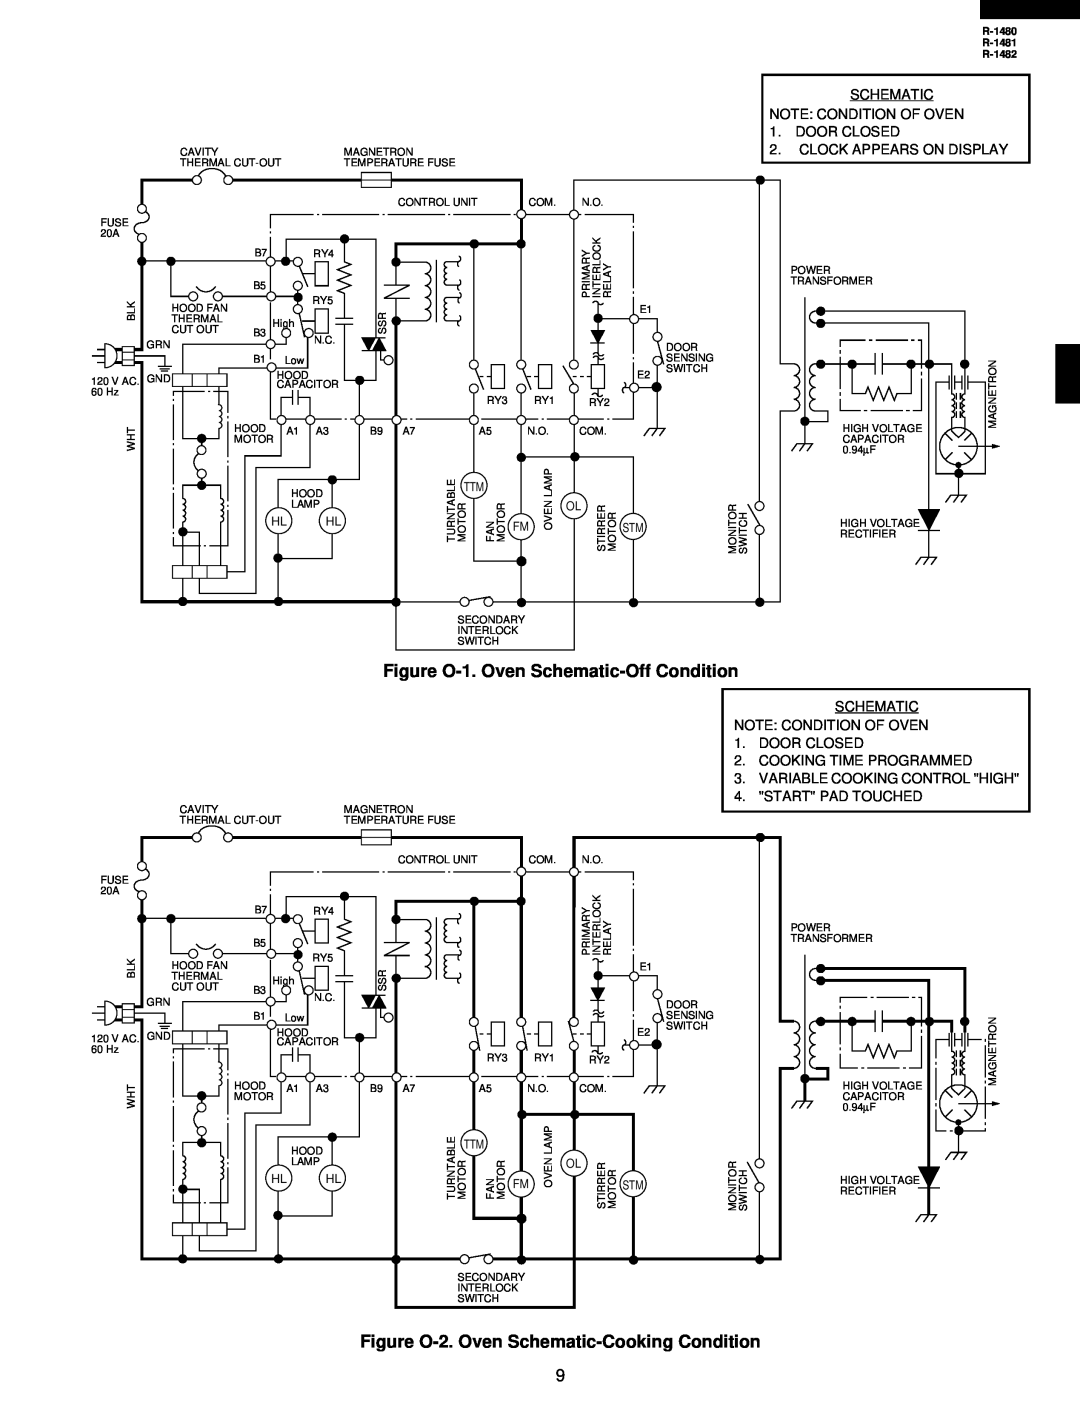 Sharp R-1481 Figure O-1.Oven Schematic-OffCondition, Figure O-2.Oven Schematic-CookingCondition, Clock Appears On Display 